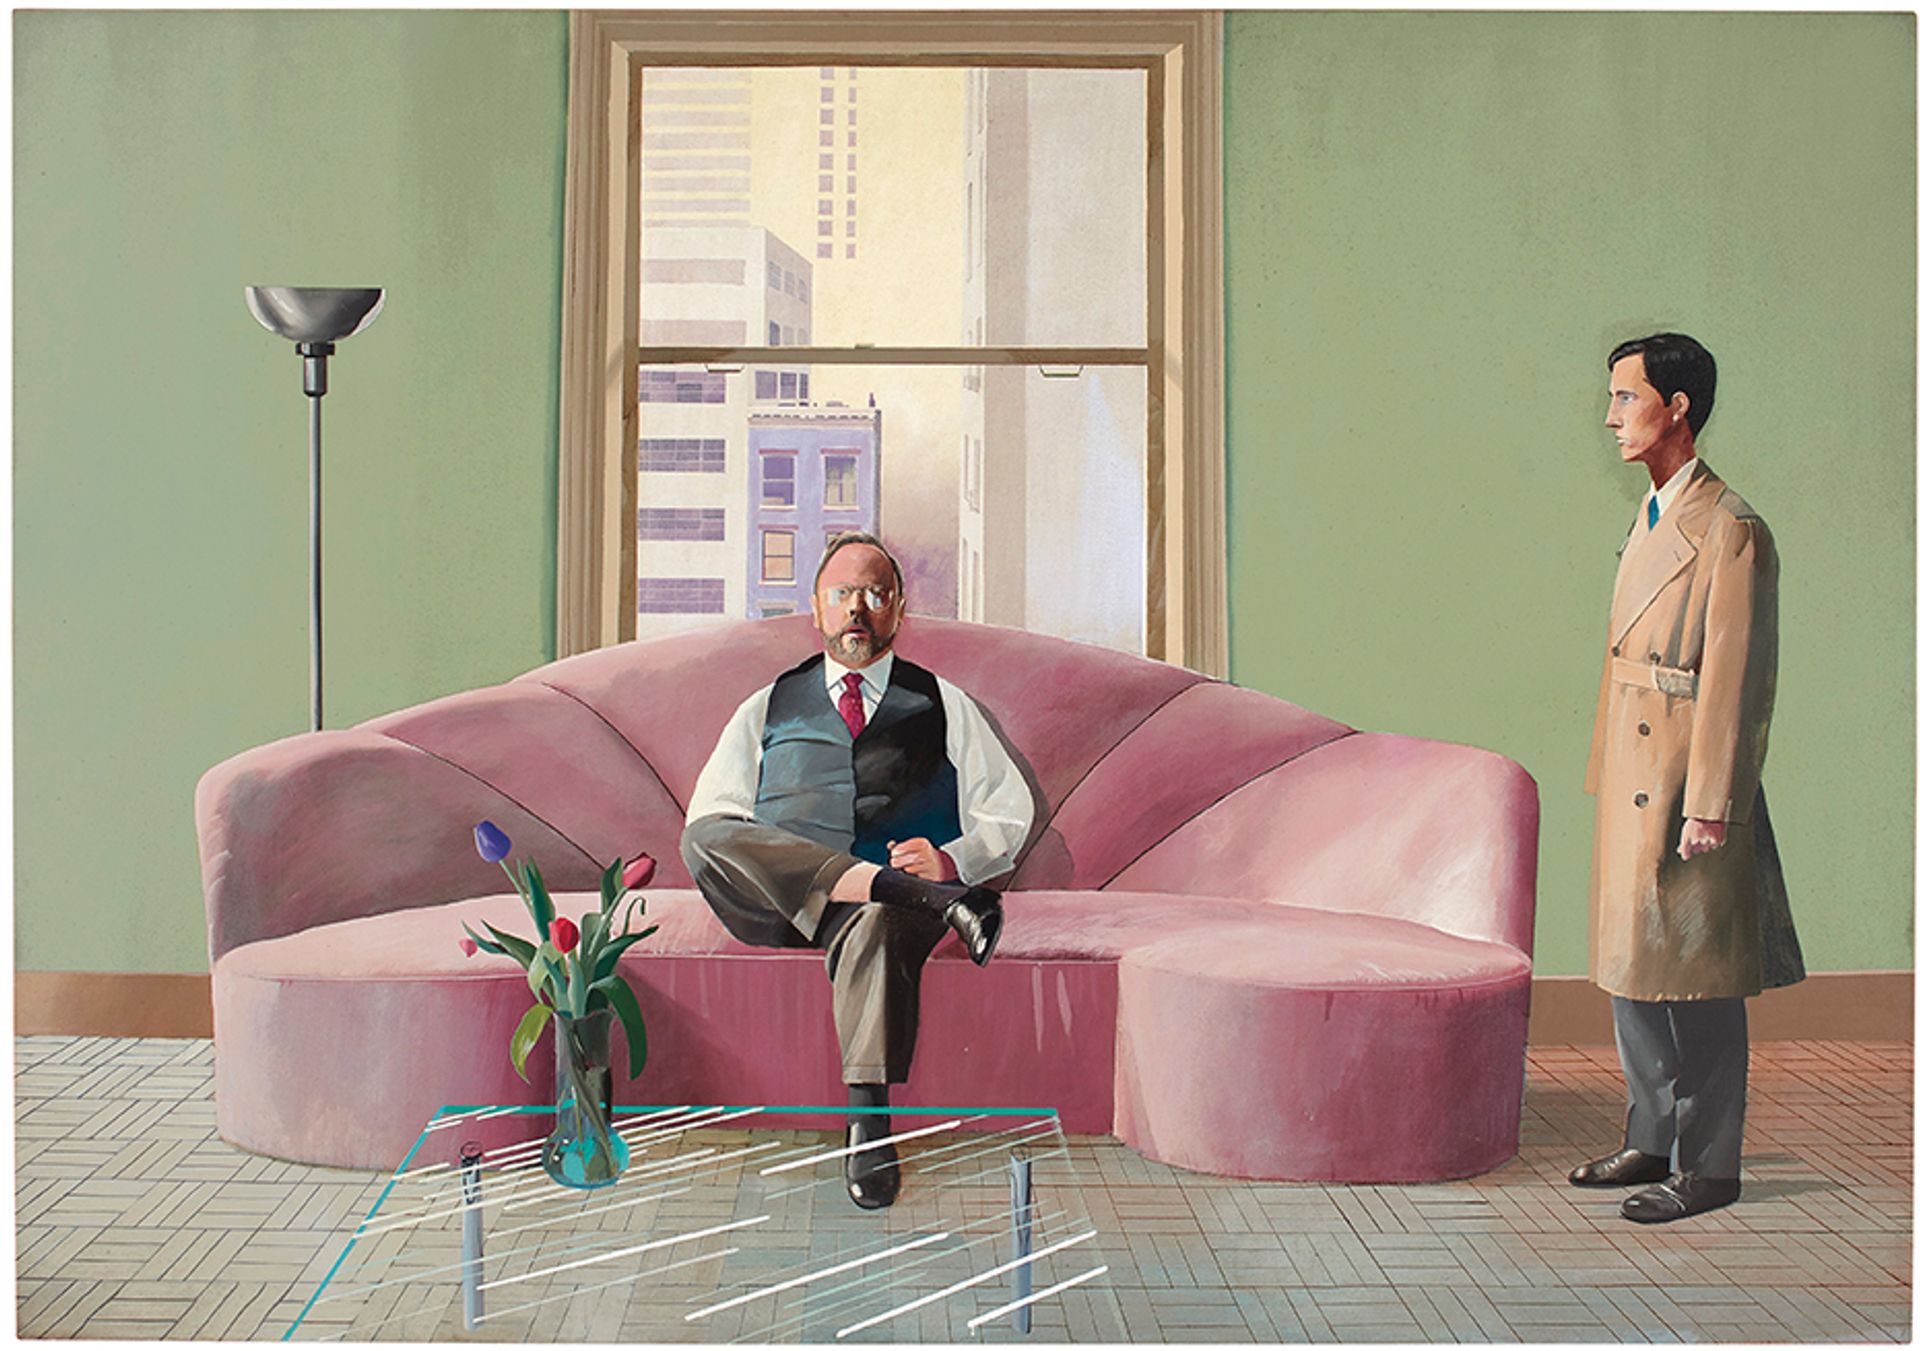 A 1969 portrait of Henry Geldzahler and Christopher Scott by David Hockney, who became the world’s most expensive living artist last year. Courtesy of Christie's